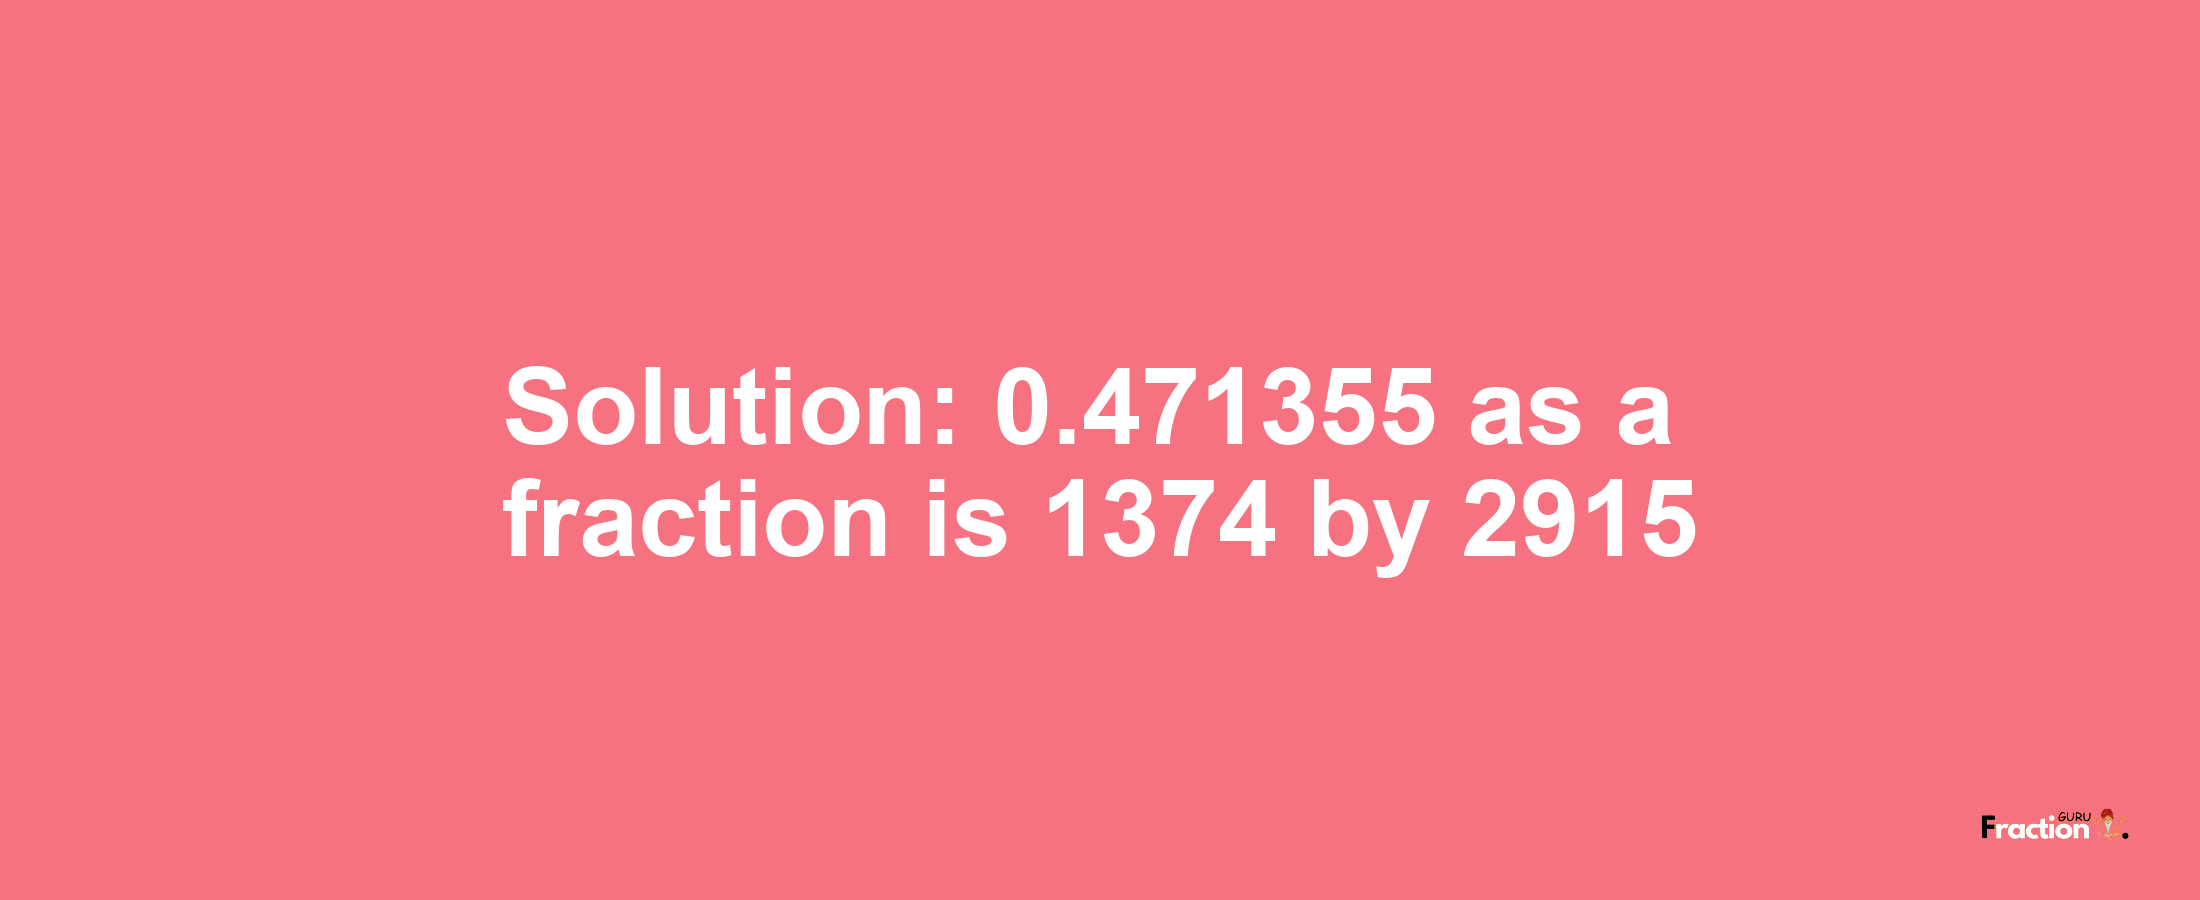 Solution:0.471355 as a fraction is 1374/2915